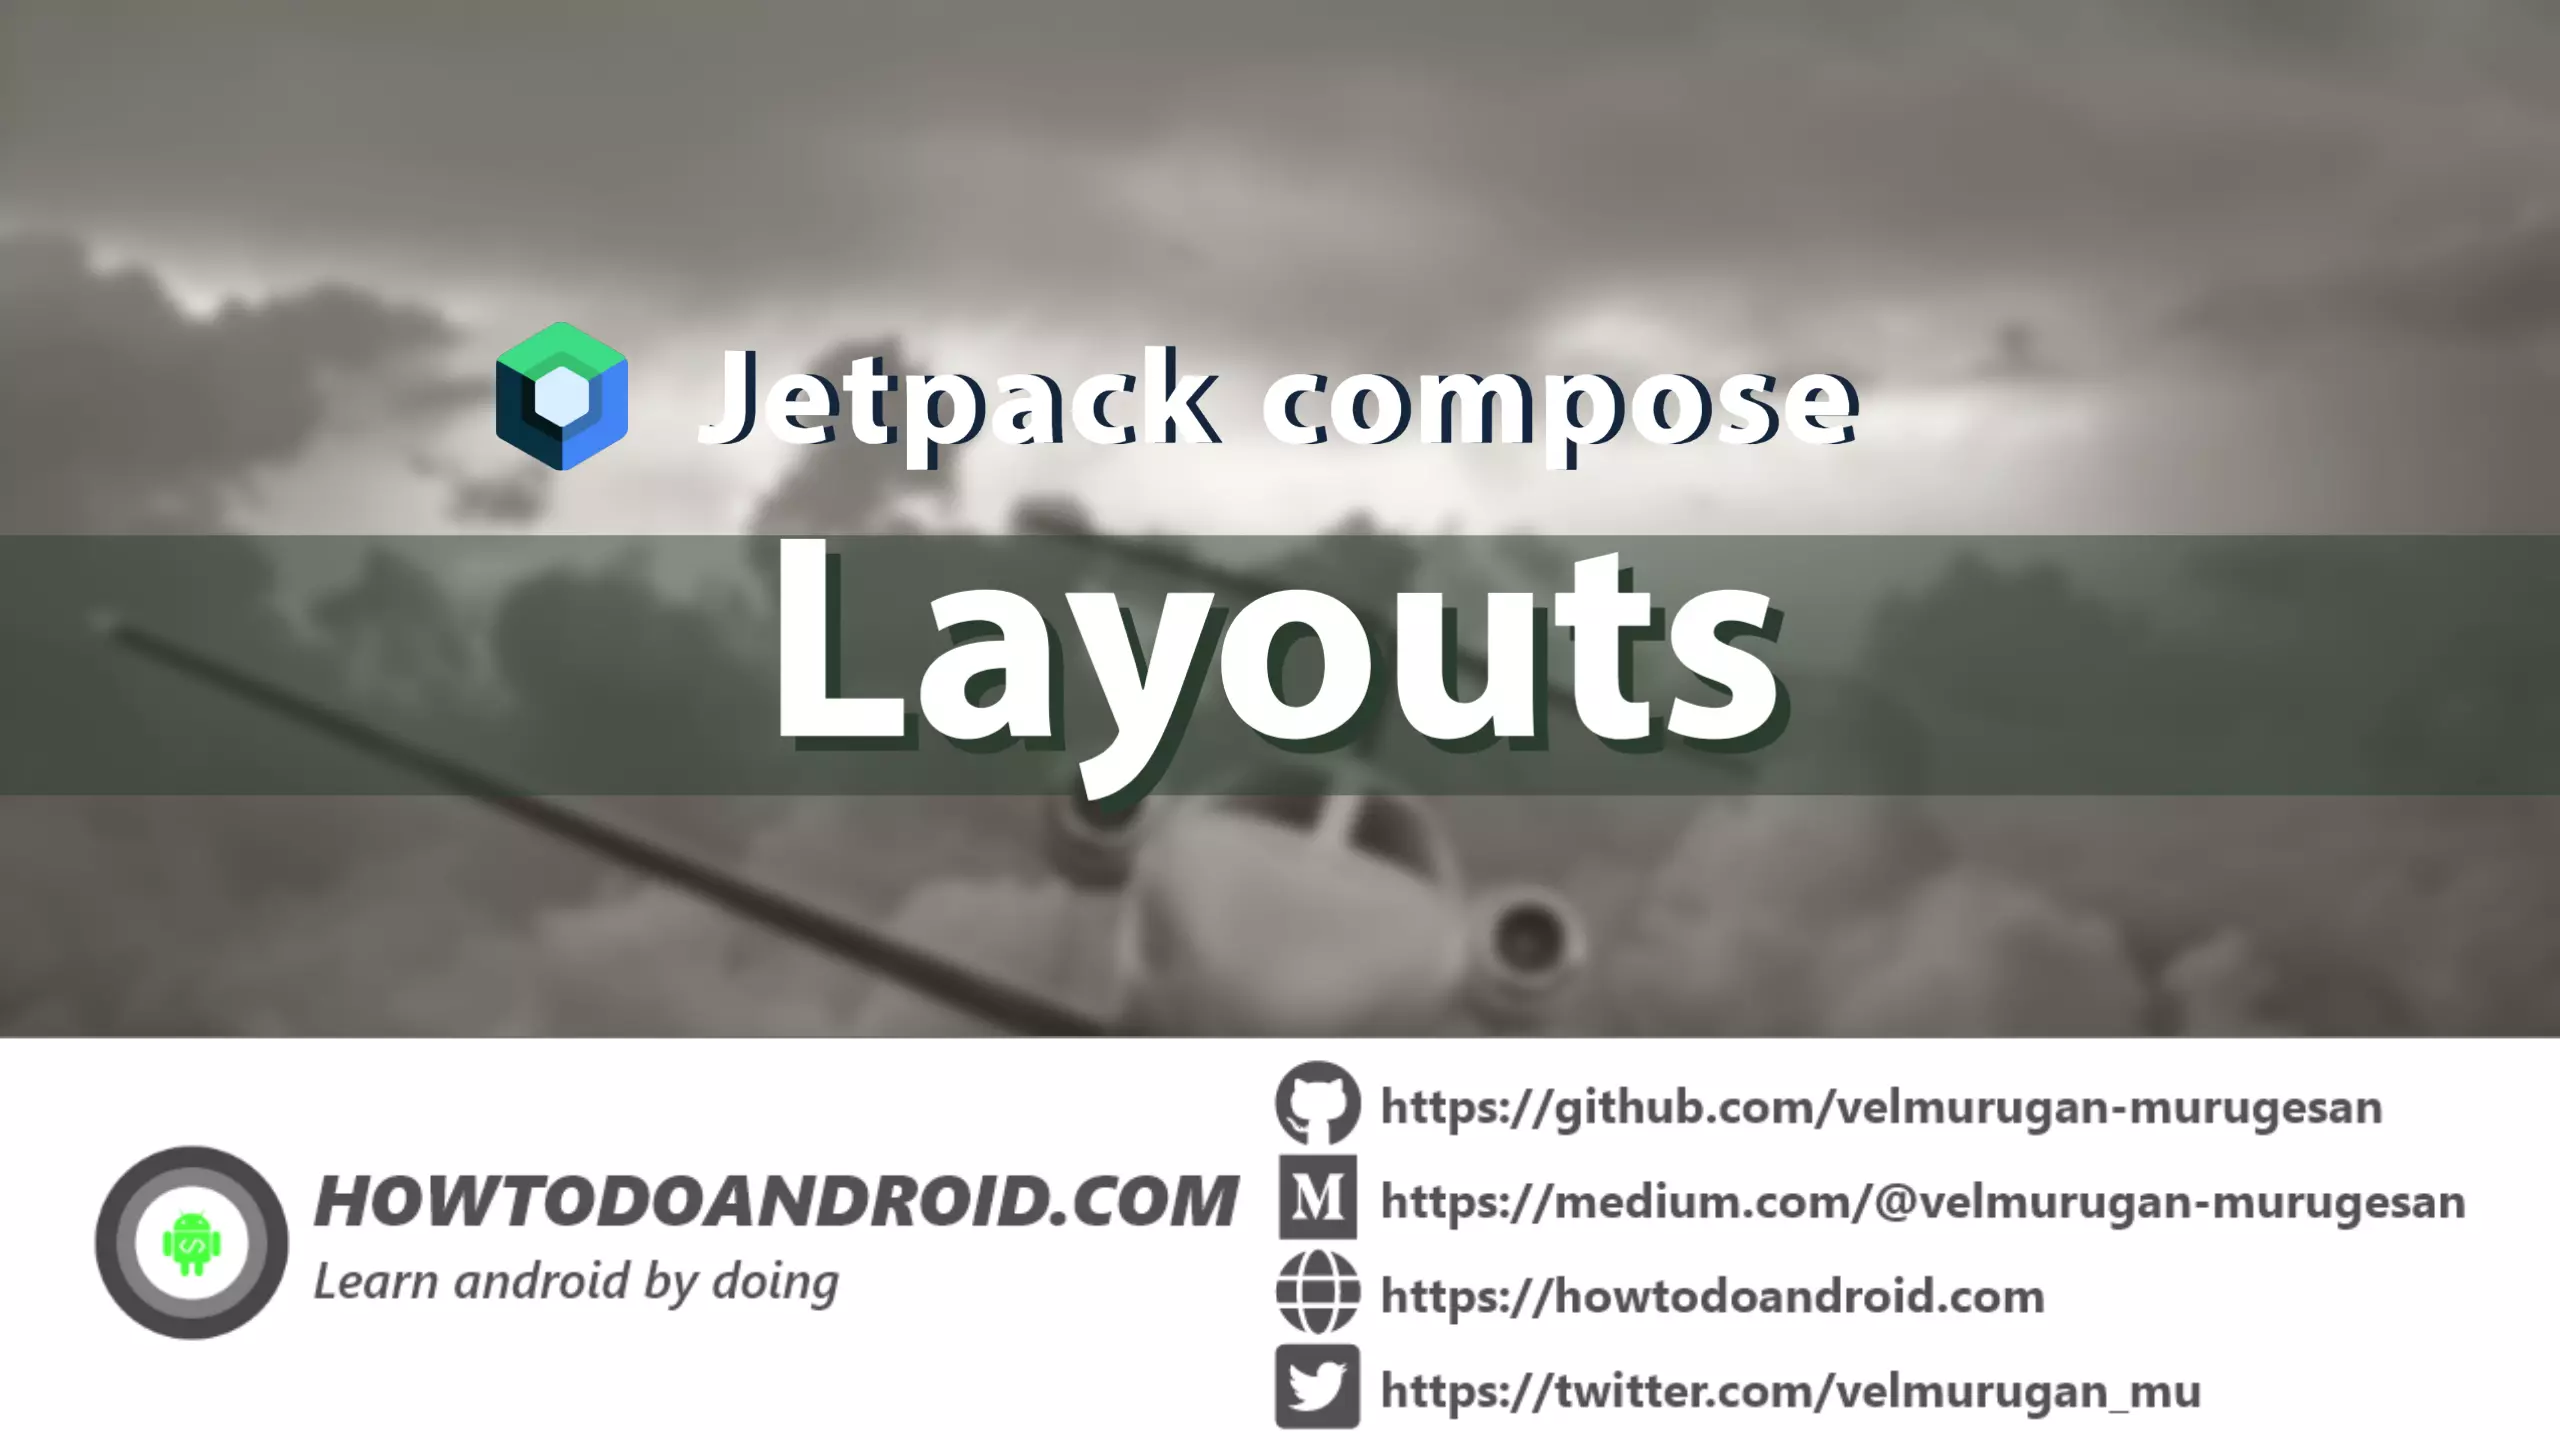 Getting started with jetpack compose – Layouts